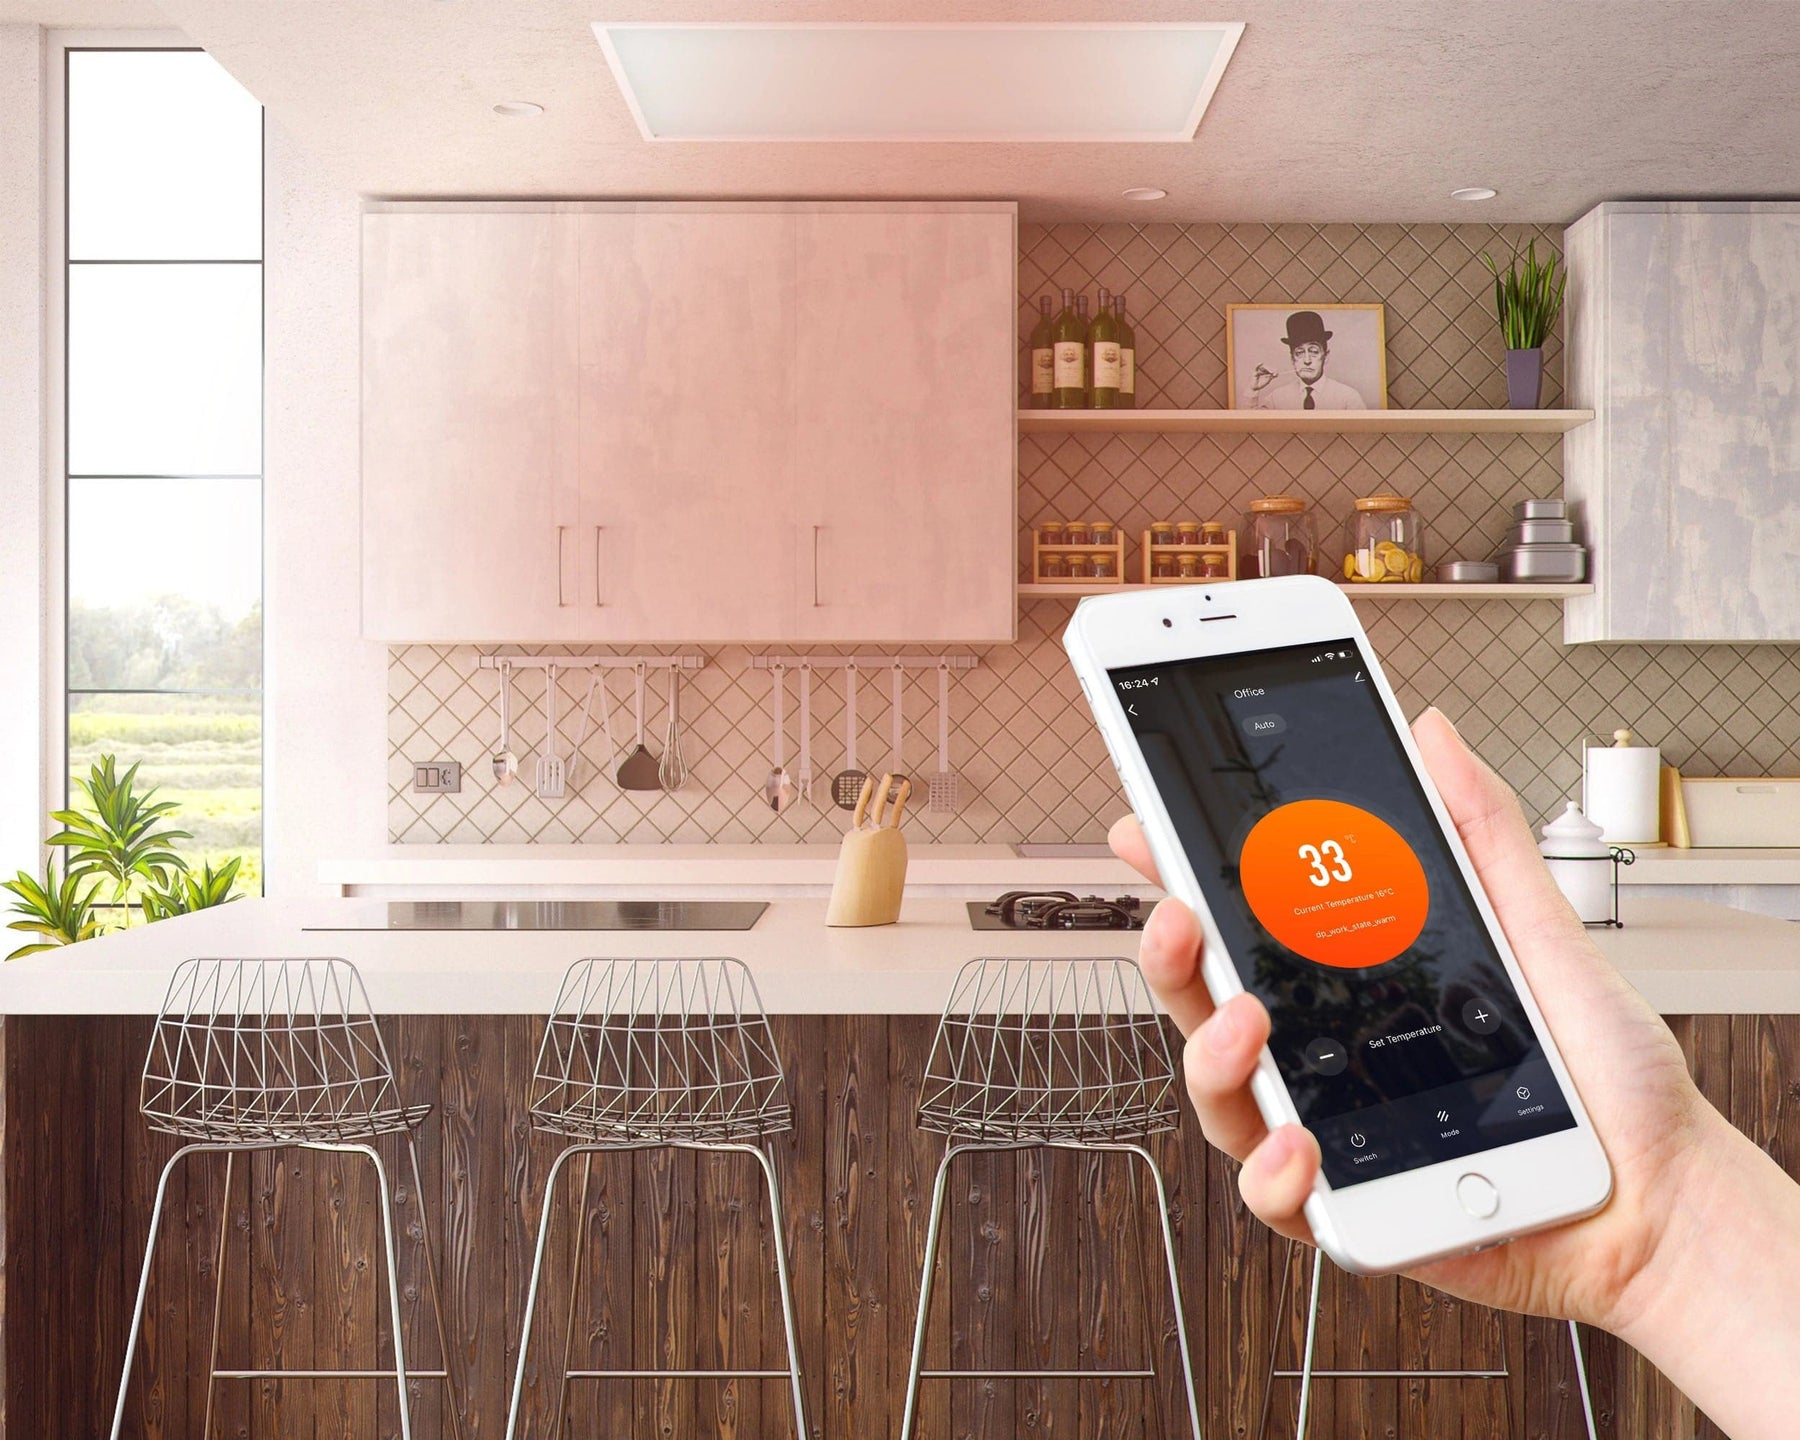 KIASA 1200W Smart Wi-Fi Infrared Heating Panel - controlled with APP, Tuya App/Smart Life App on the phone - Ceiling mounted panel in the kitchen set at targeted temperature